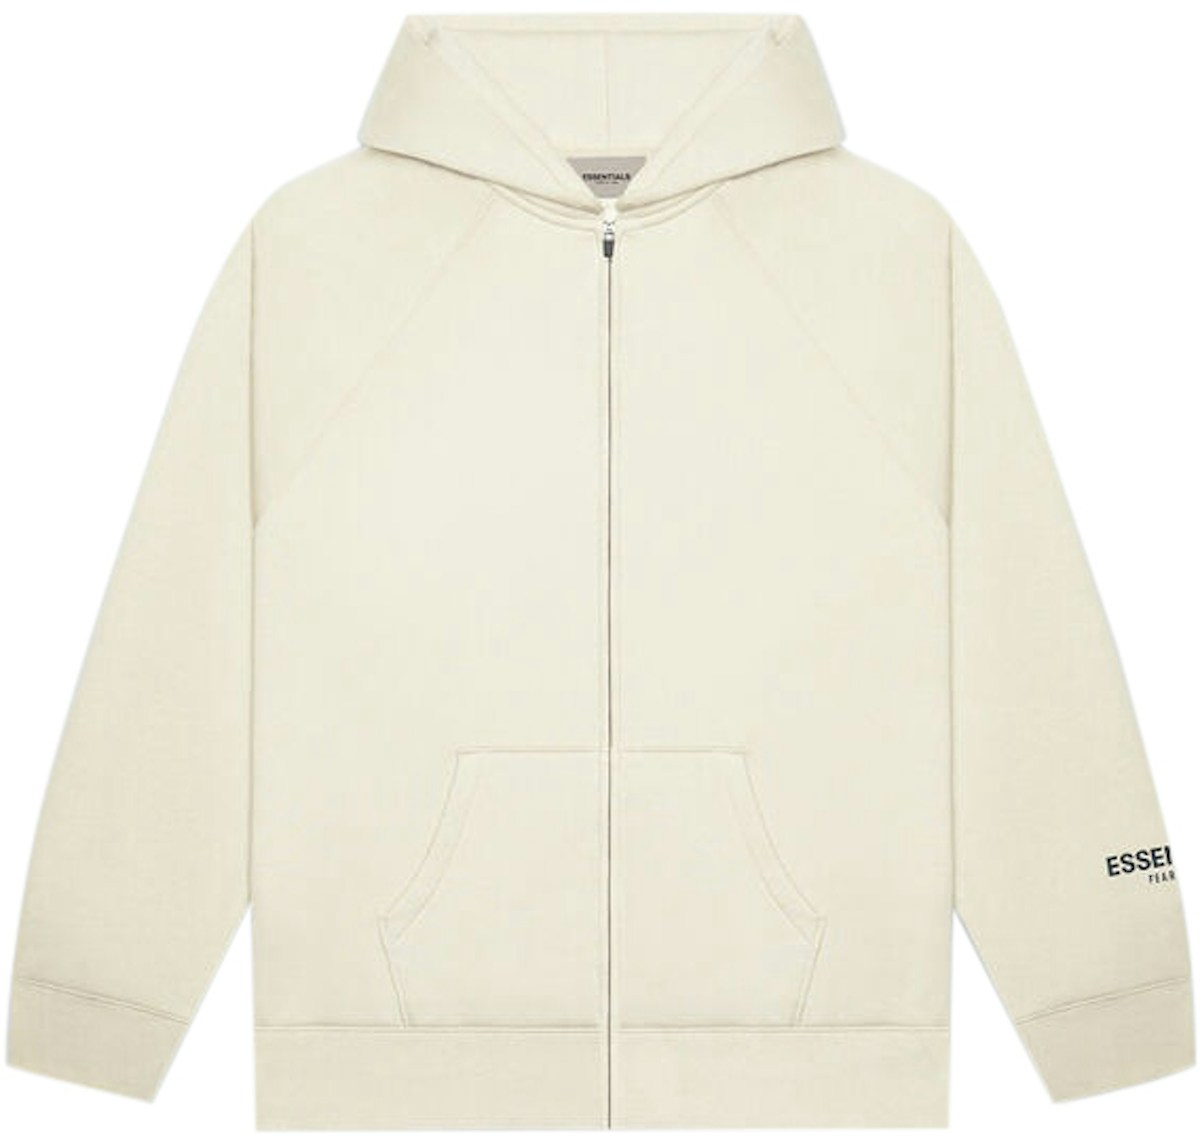 FEAR OF GOD ESSENTIALS 3D Silicon Applique Full Zip Up Hoodie